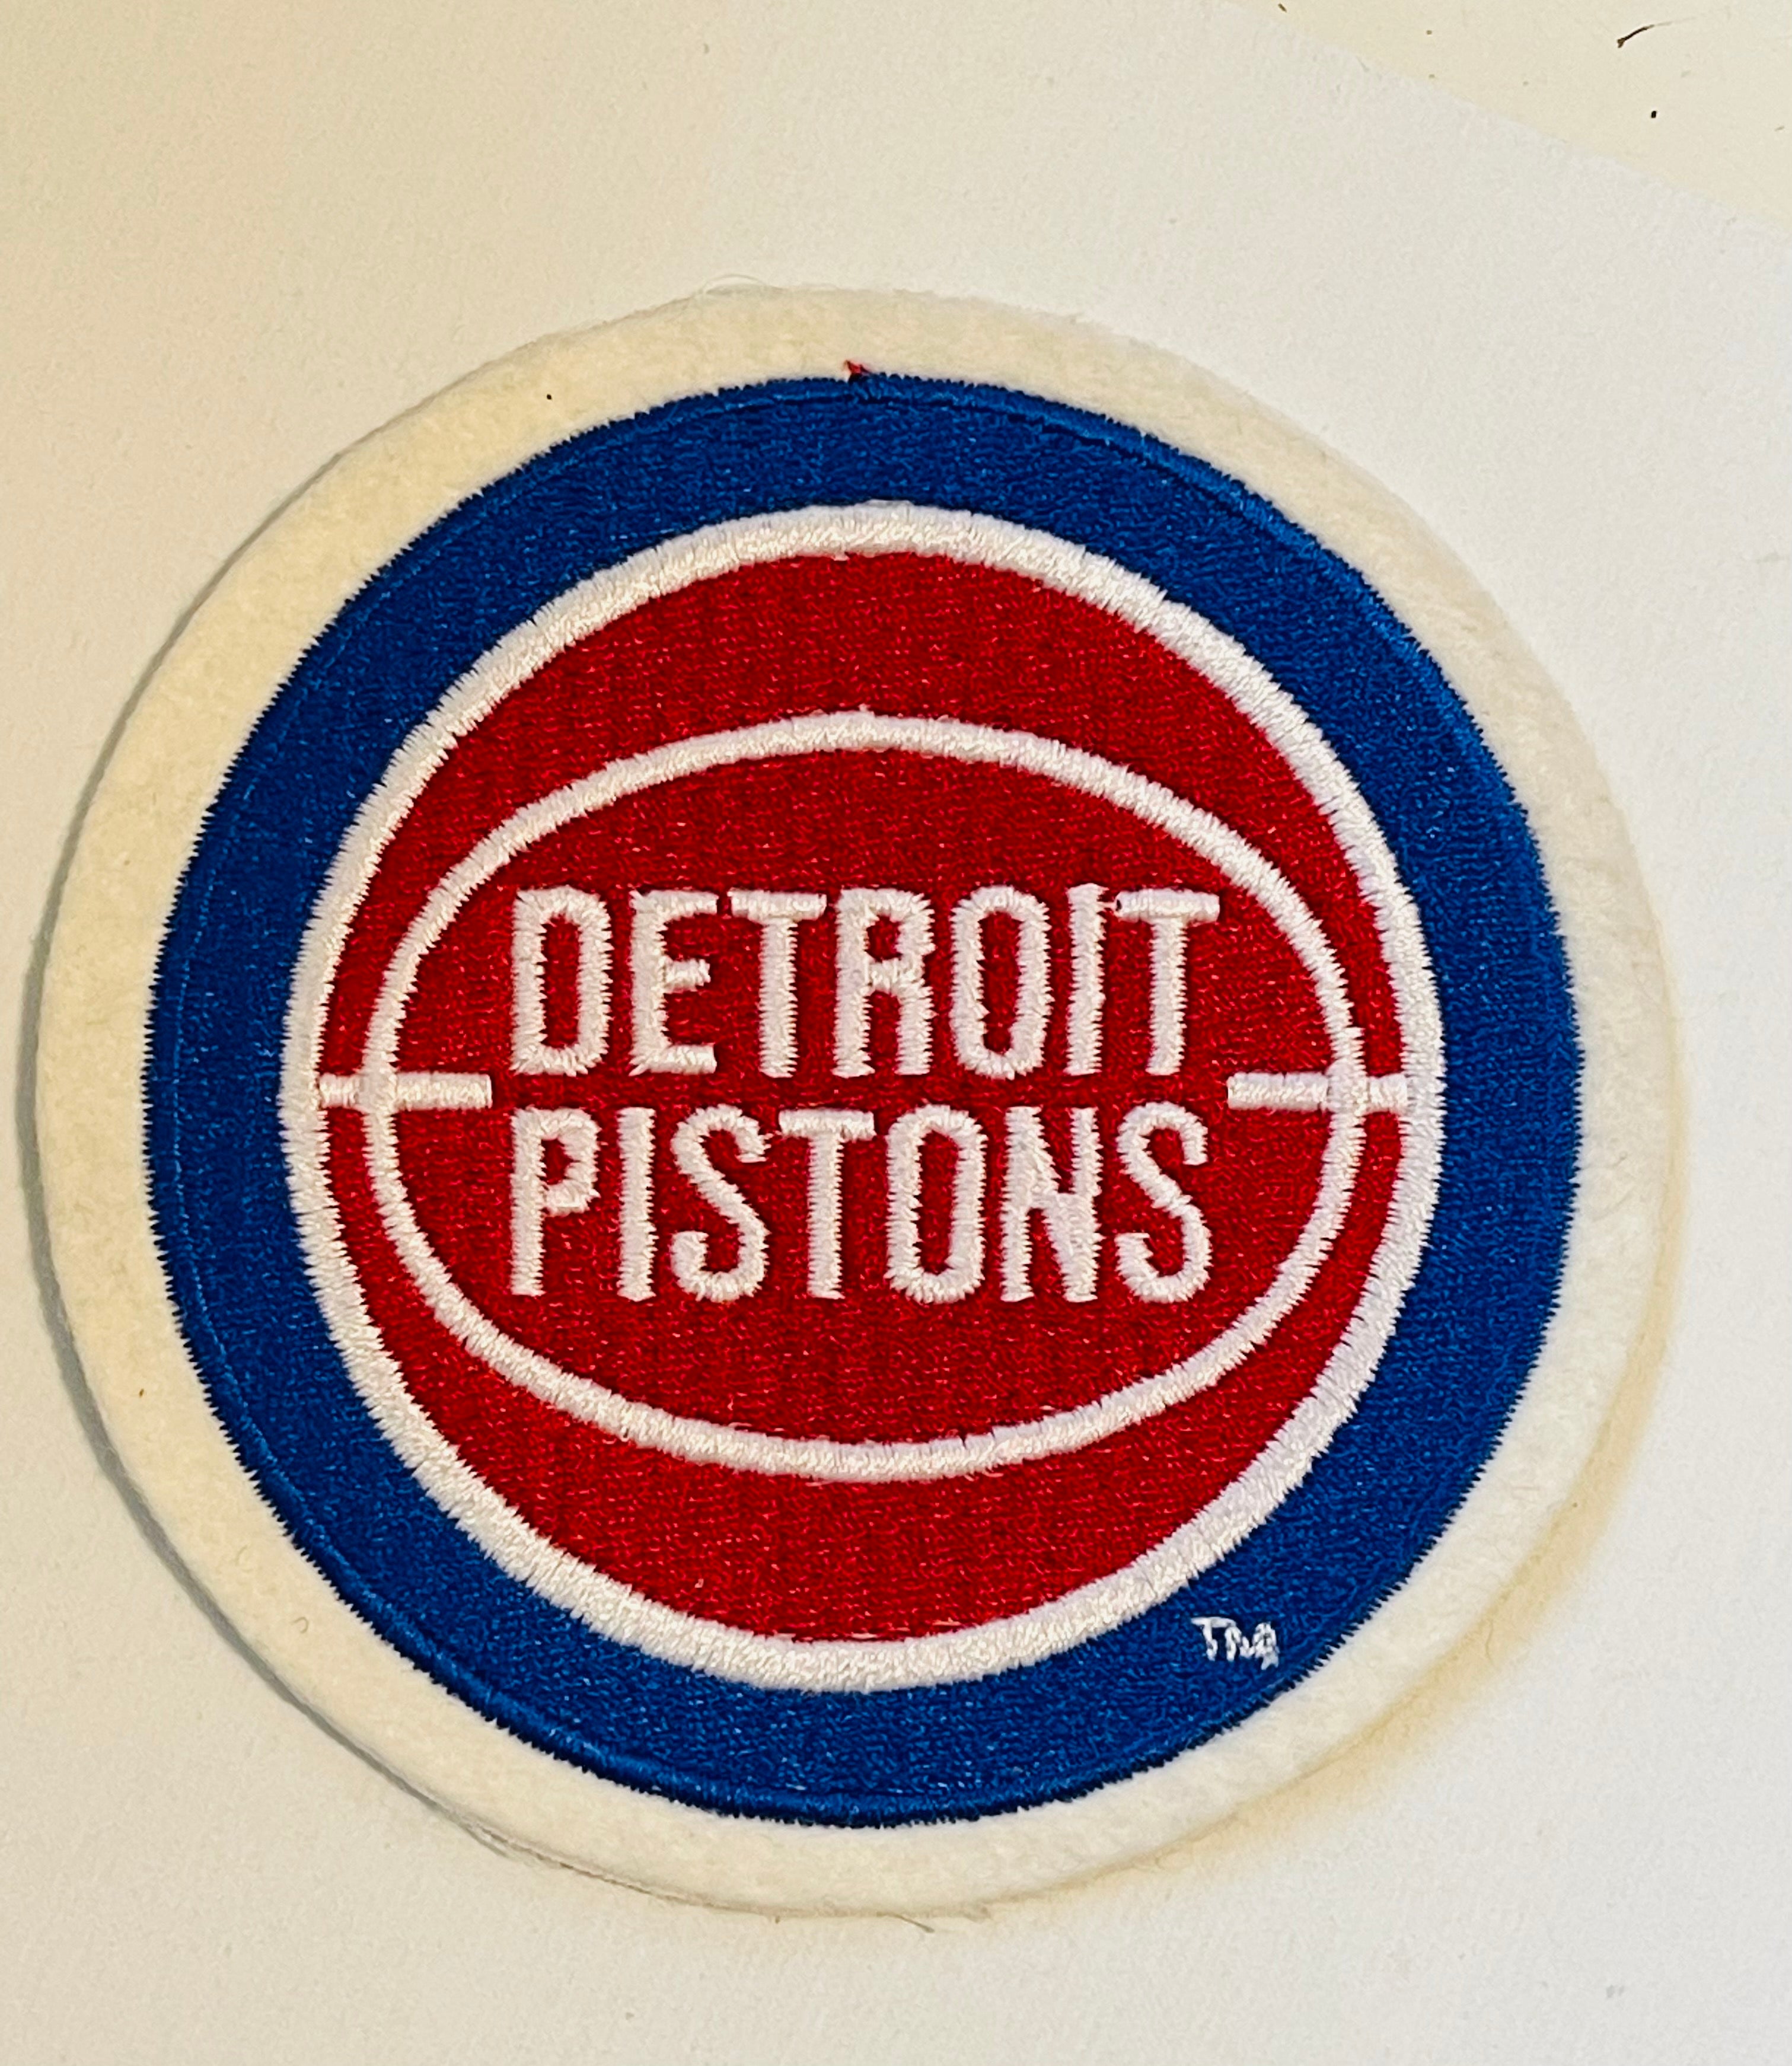 Detroit Pistons basketball vintage 5 inch patch 1990s